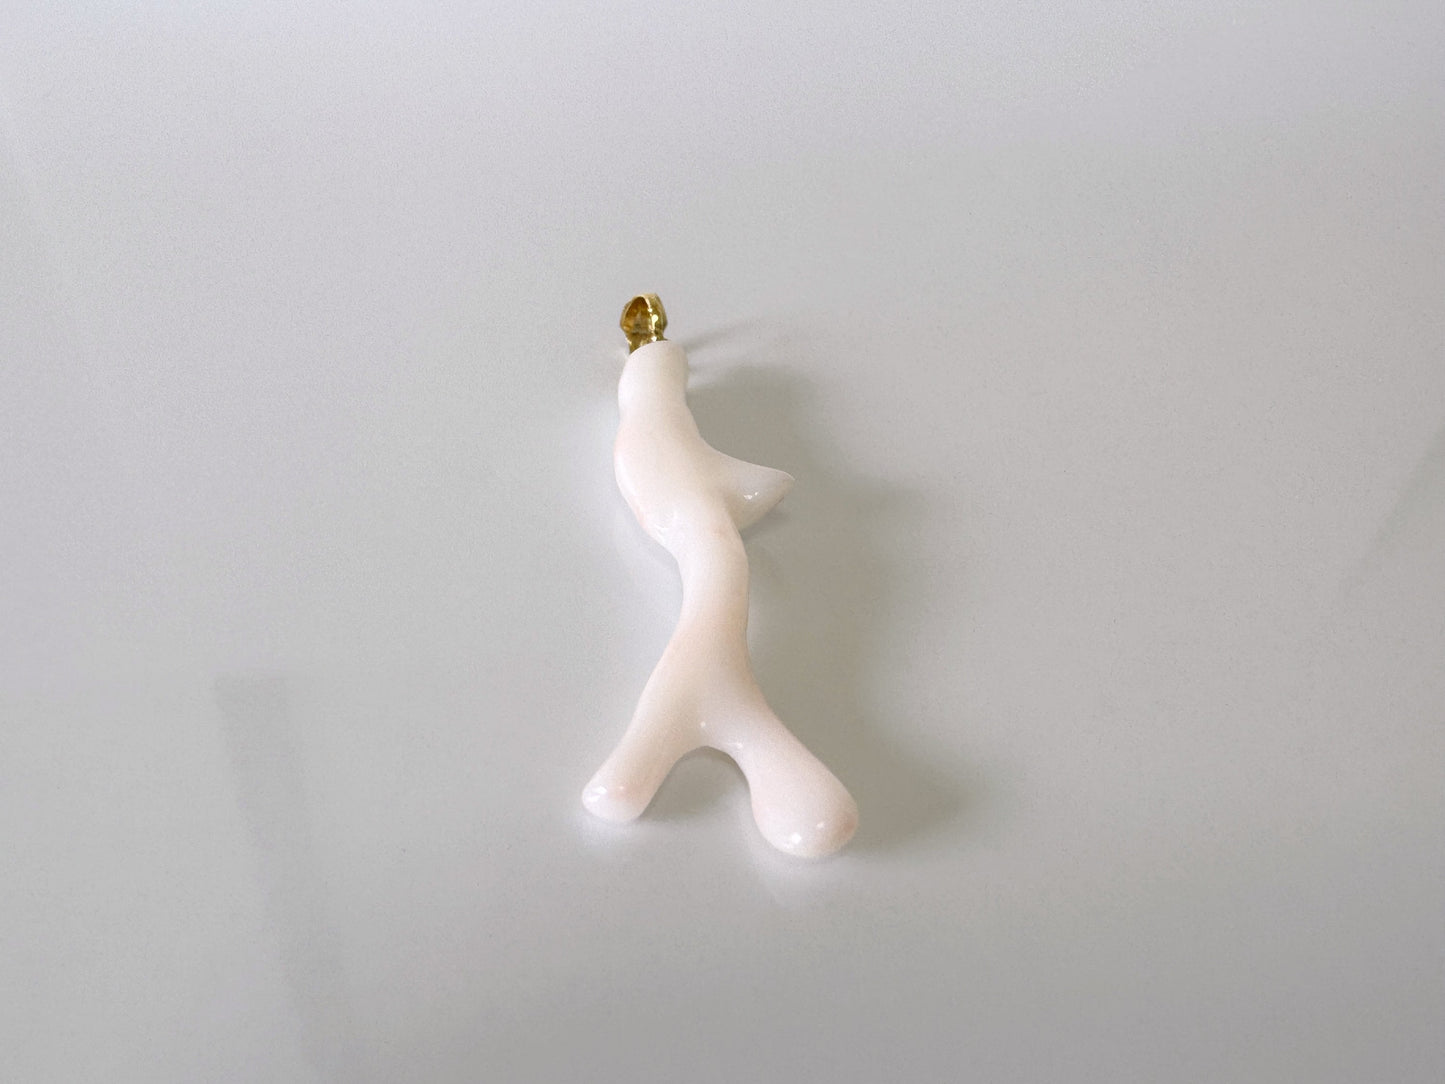 Natural White Coral Branch Pendant, Natural color, Japanese White Precious Coral, Silver Bail (gold-plated)